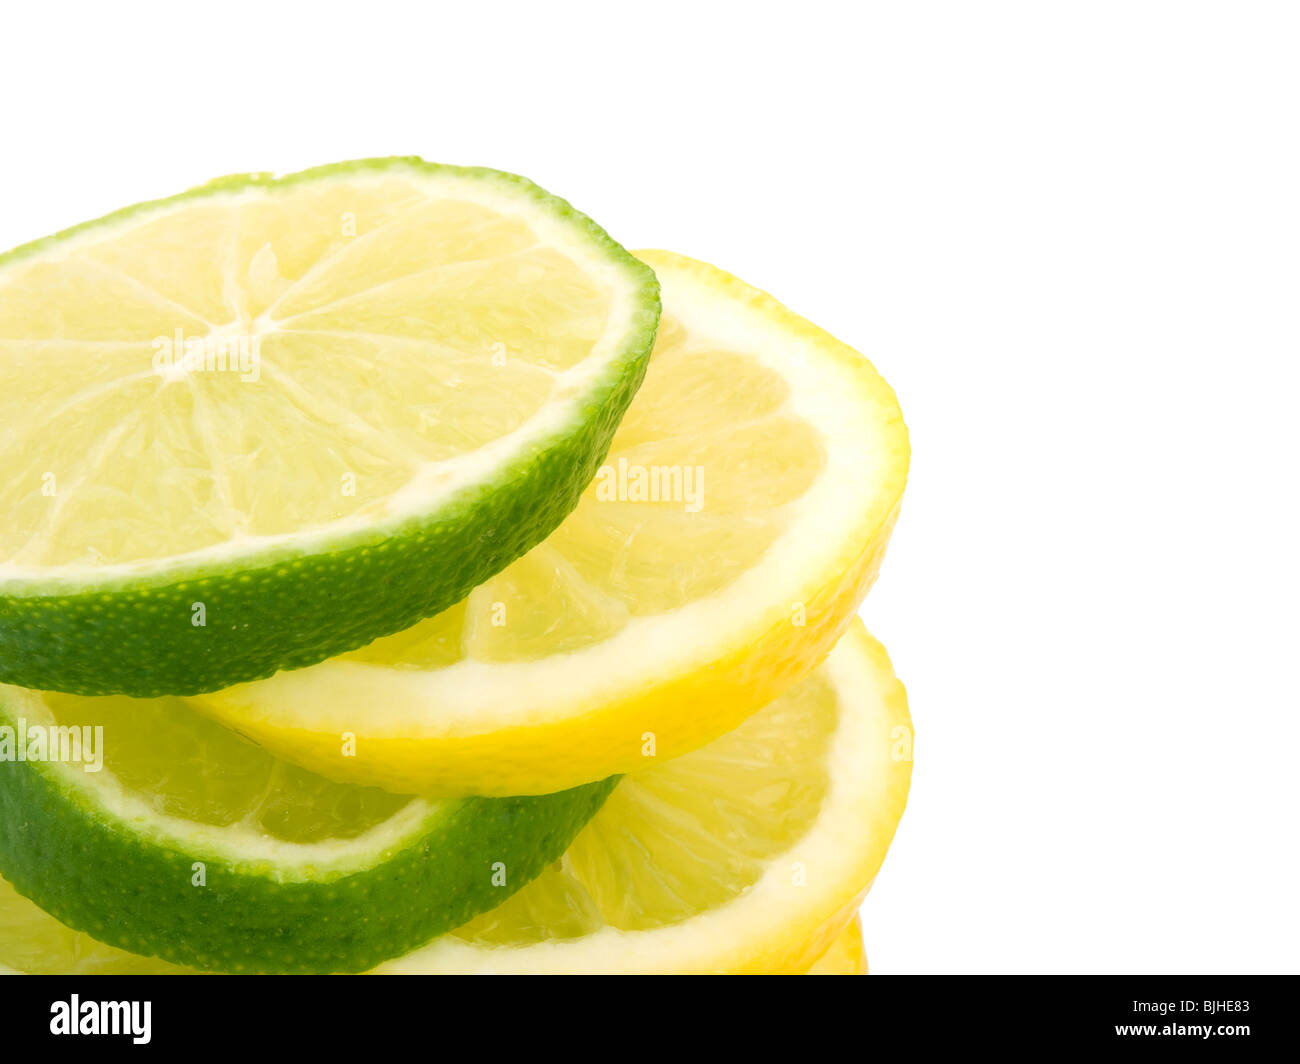 Closeup picture of lemon and lime slices on white background Stock Photo